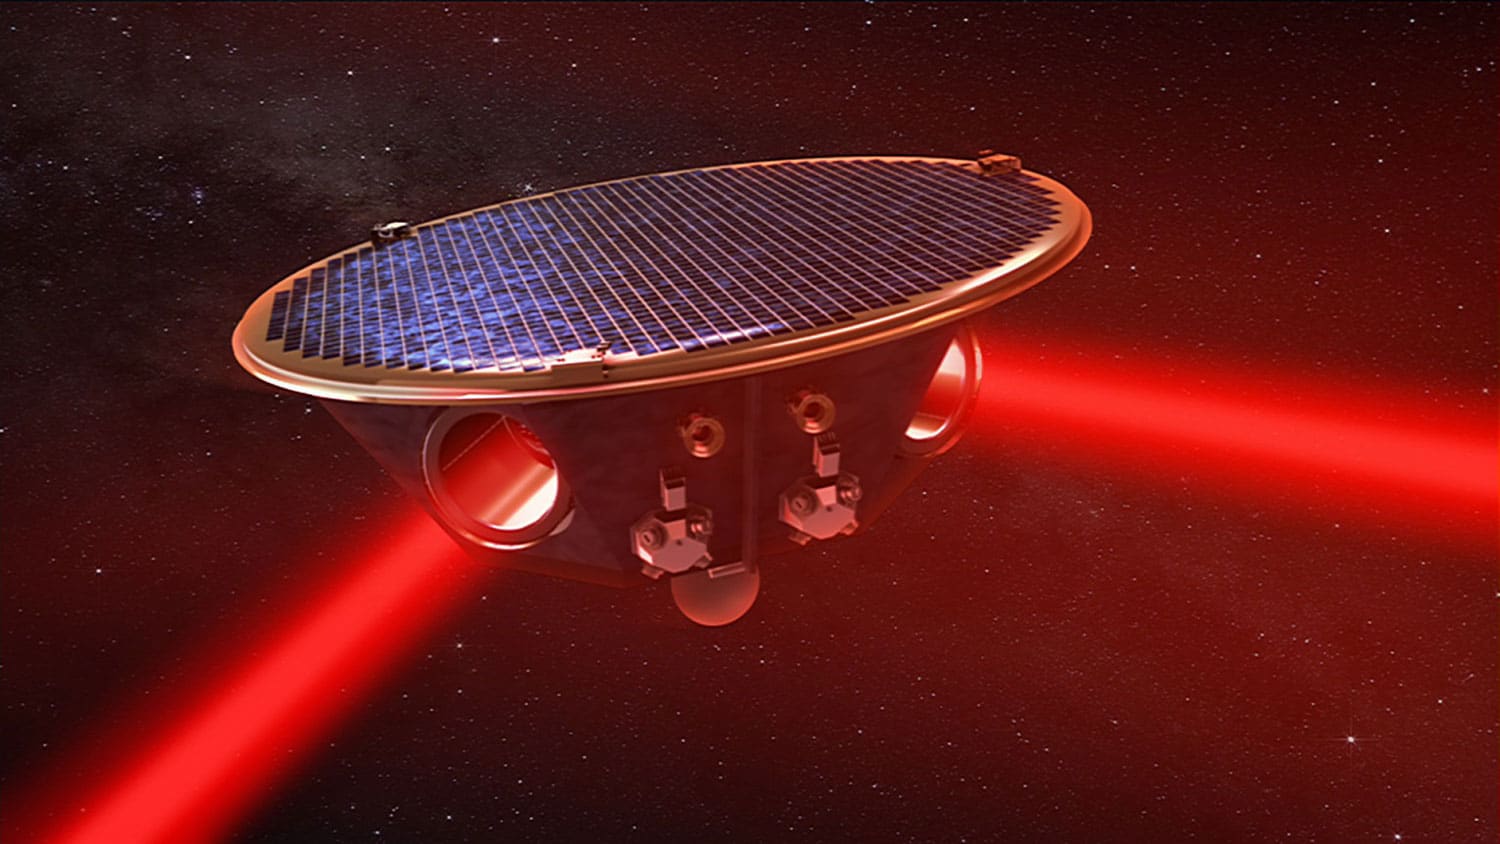 Lasers fired between the satellites, shown in this artist's concept, will measure how gravitational waves alter their relative distances. Credit: AEI/MM/Exozet